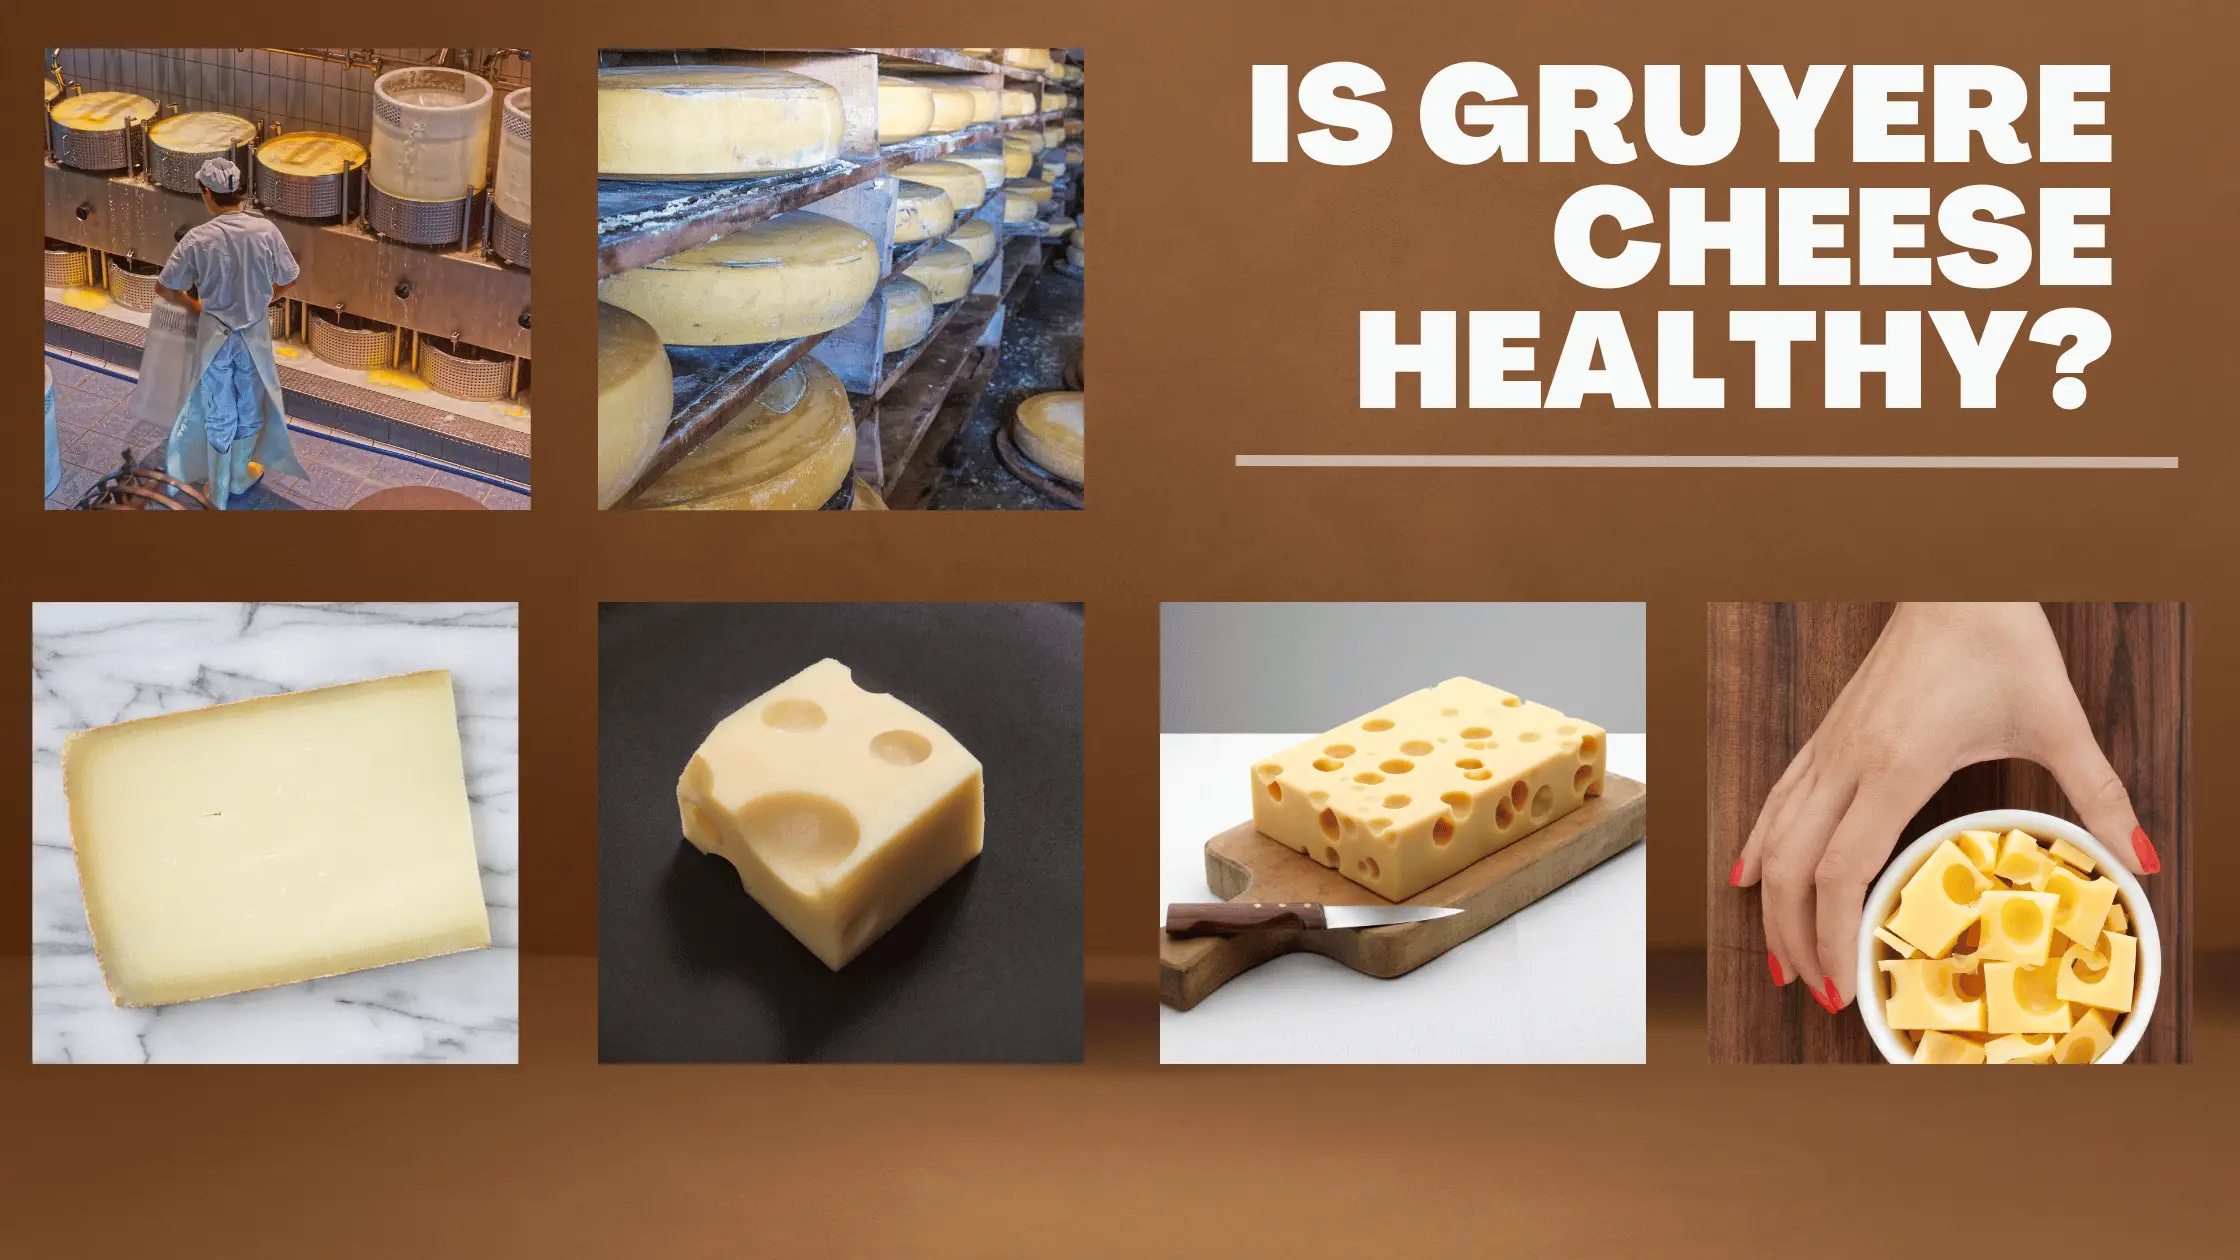 Is Gruyere Cheese Healthy or Unhealthy?